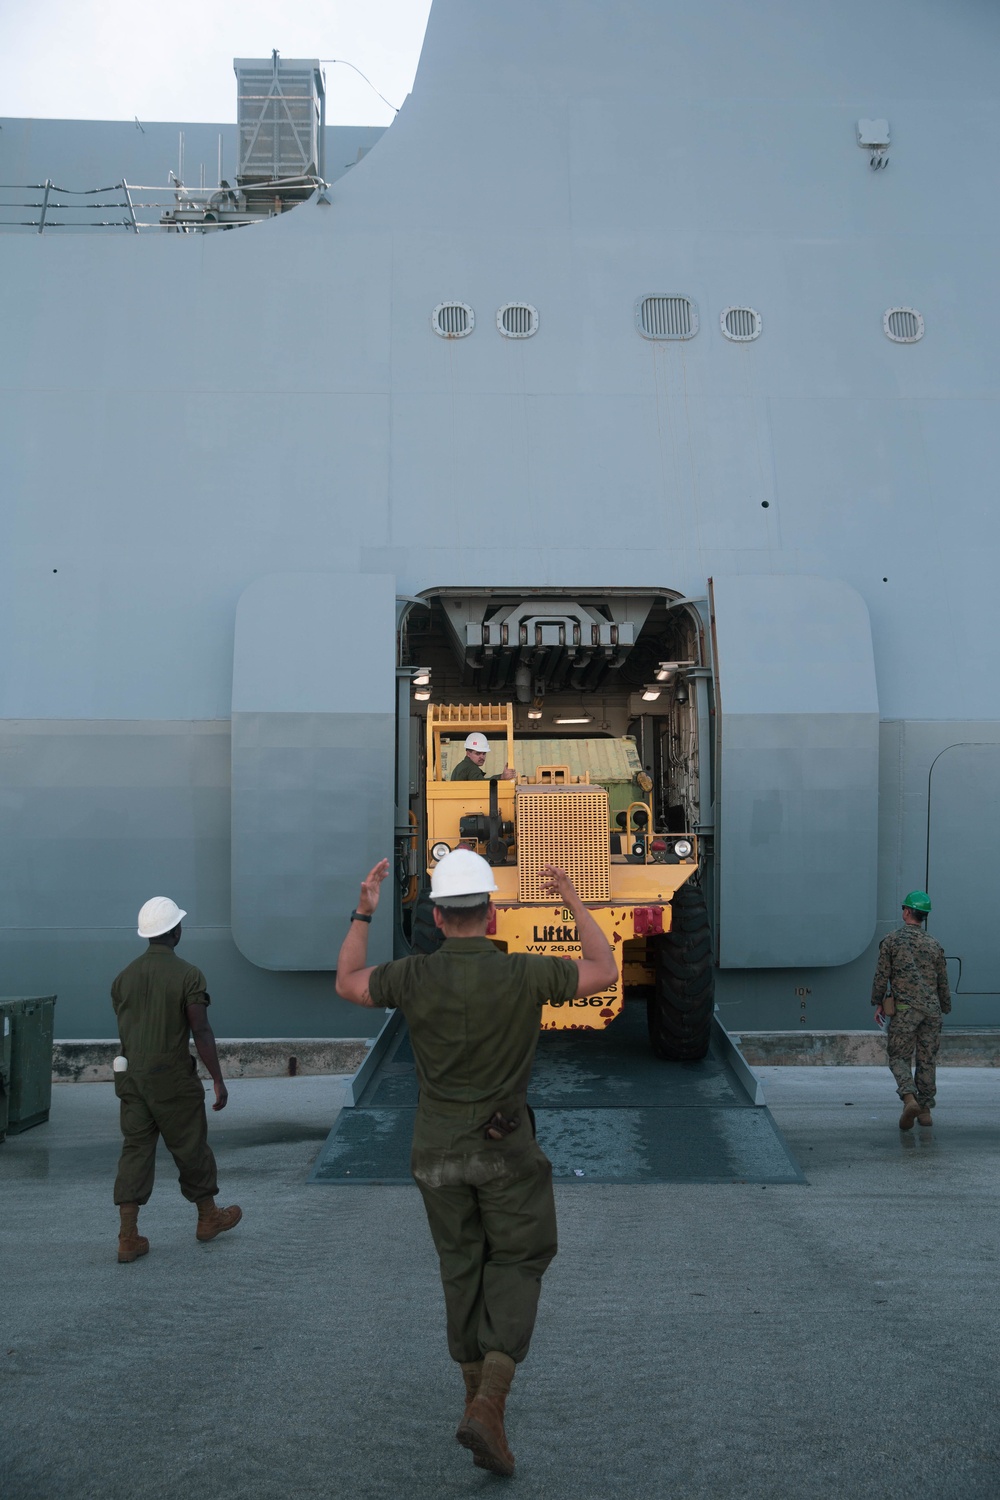 U.S. Marines Offload Equipment From the John P. Murpha (LPD 26) as Part of Exercise Freedom Banner